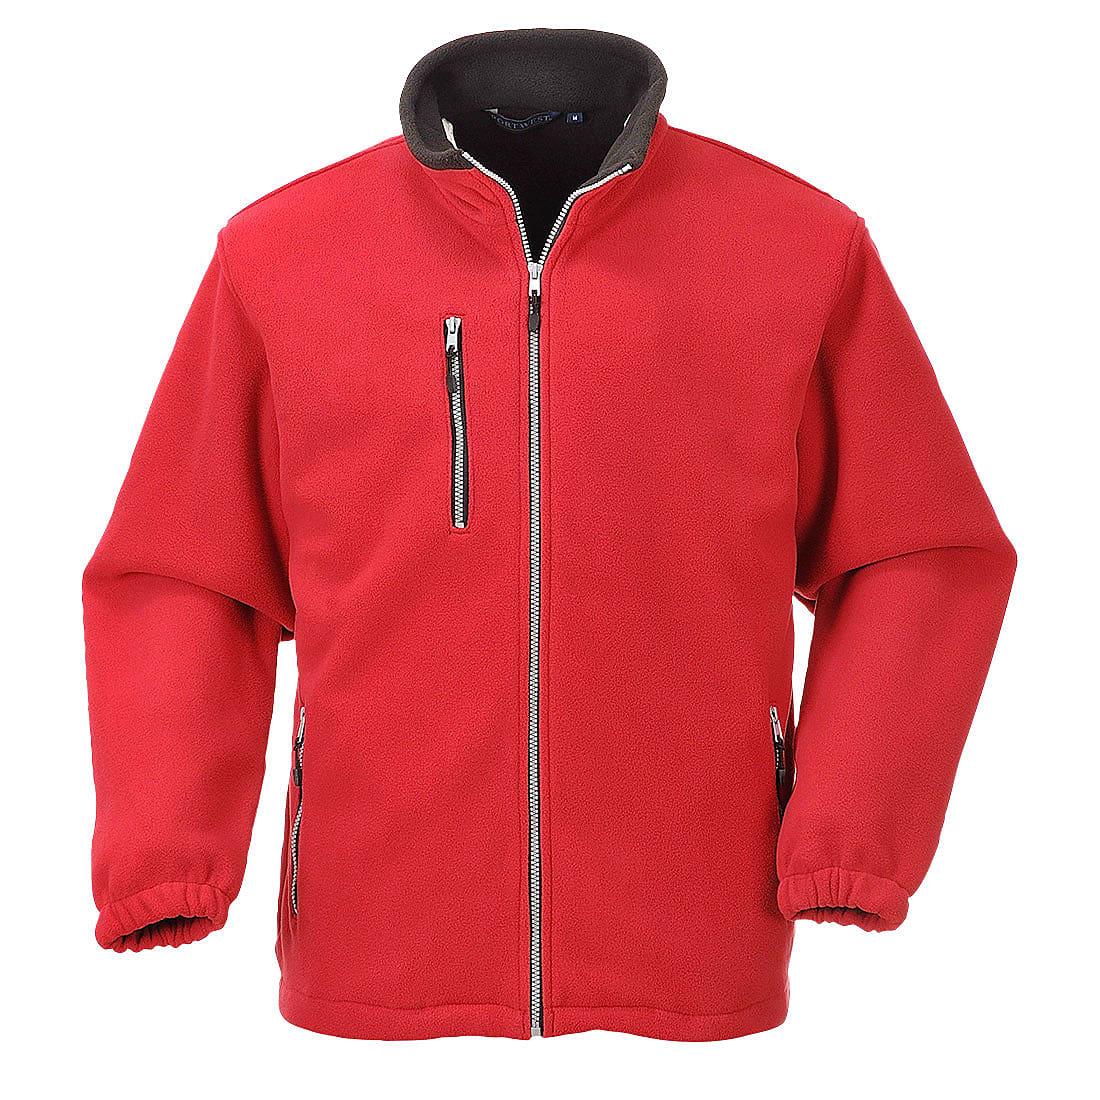 Portwest City Fleece Jacket in Red (Product Code: F401)